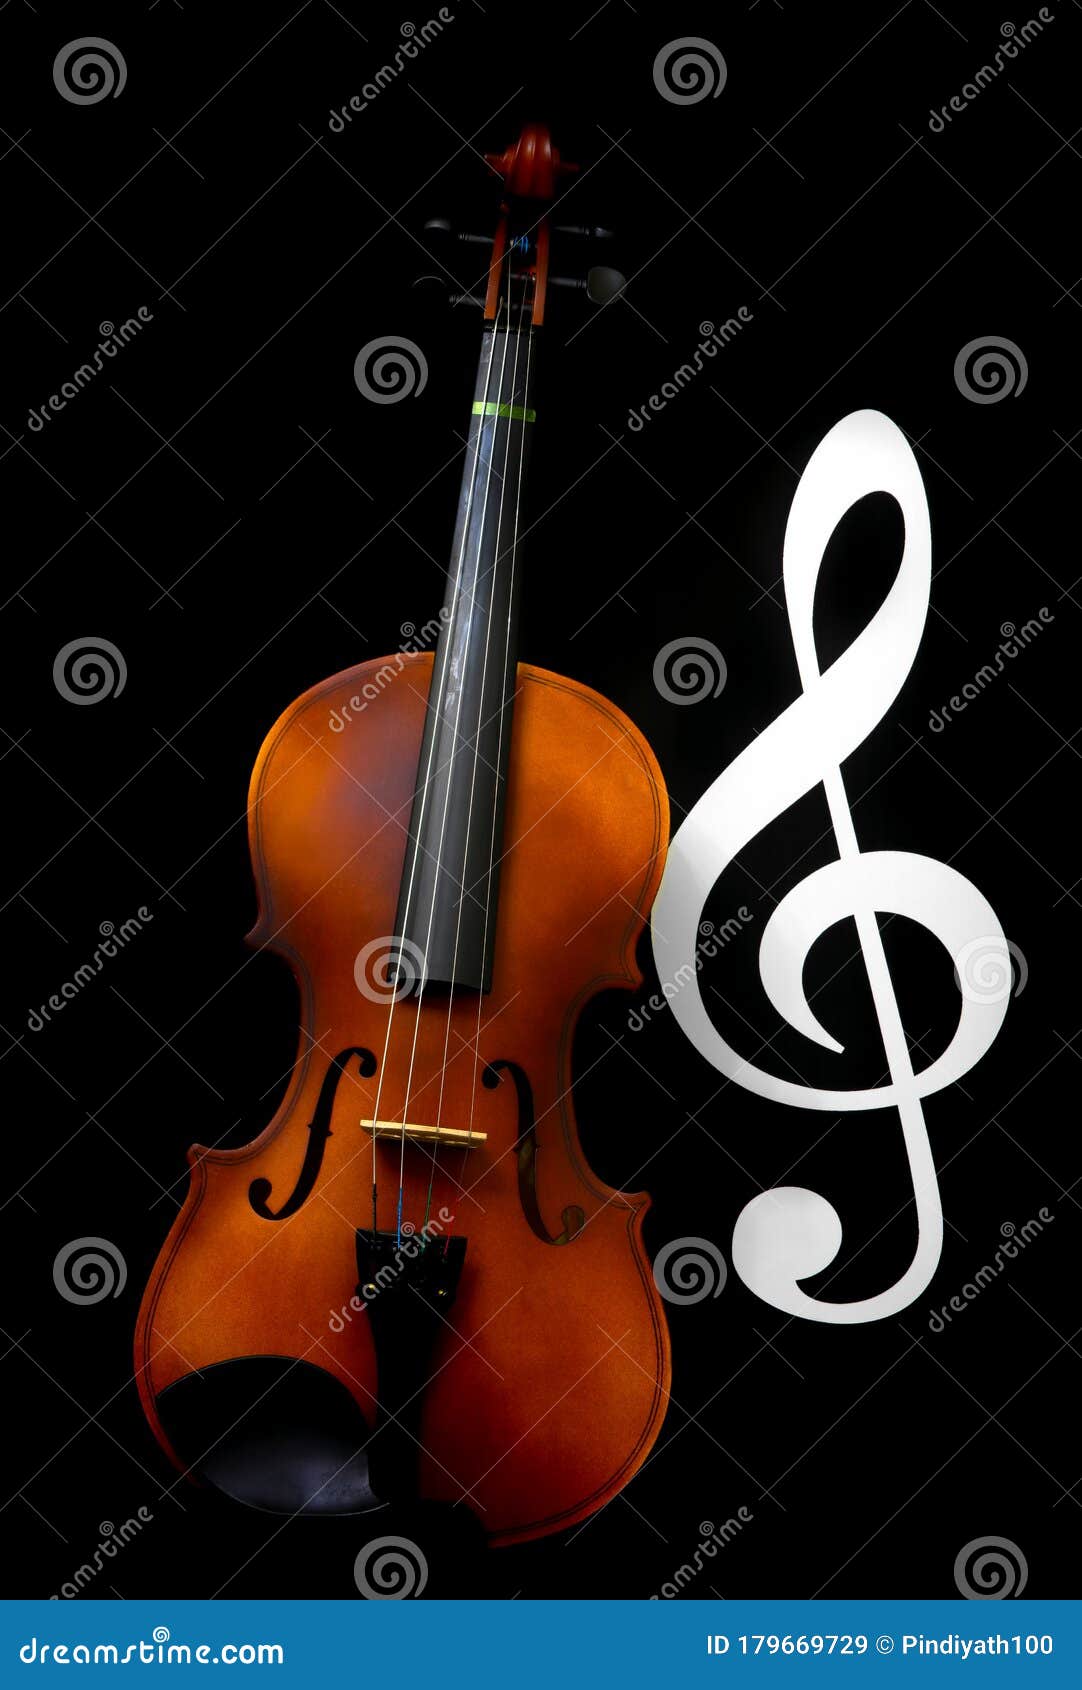 Classic Violin with Music Symbol Background Stock Image - Image of object,  artistic: 179669729